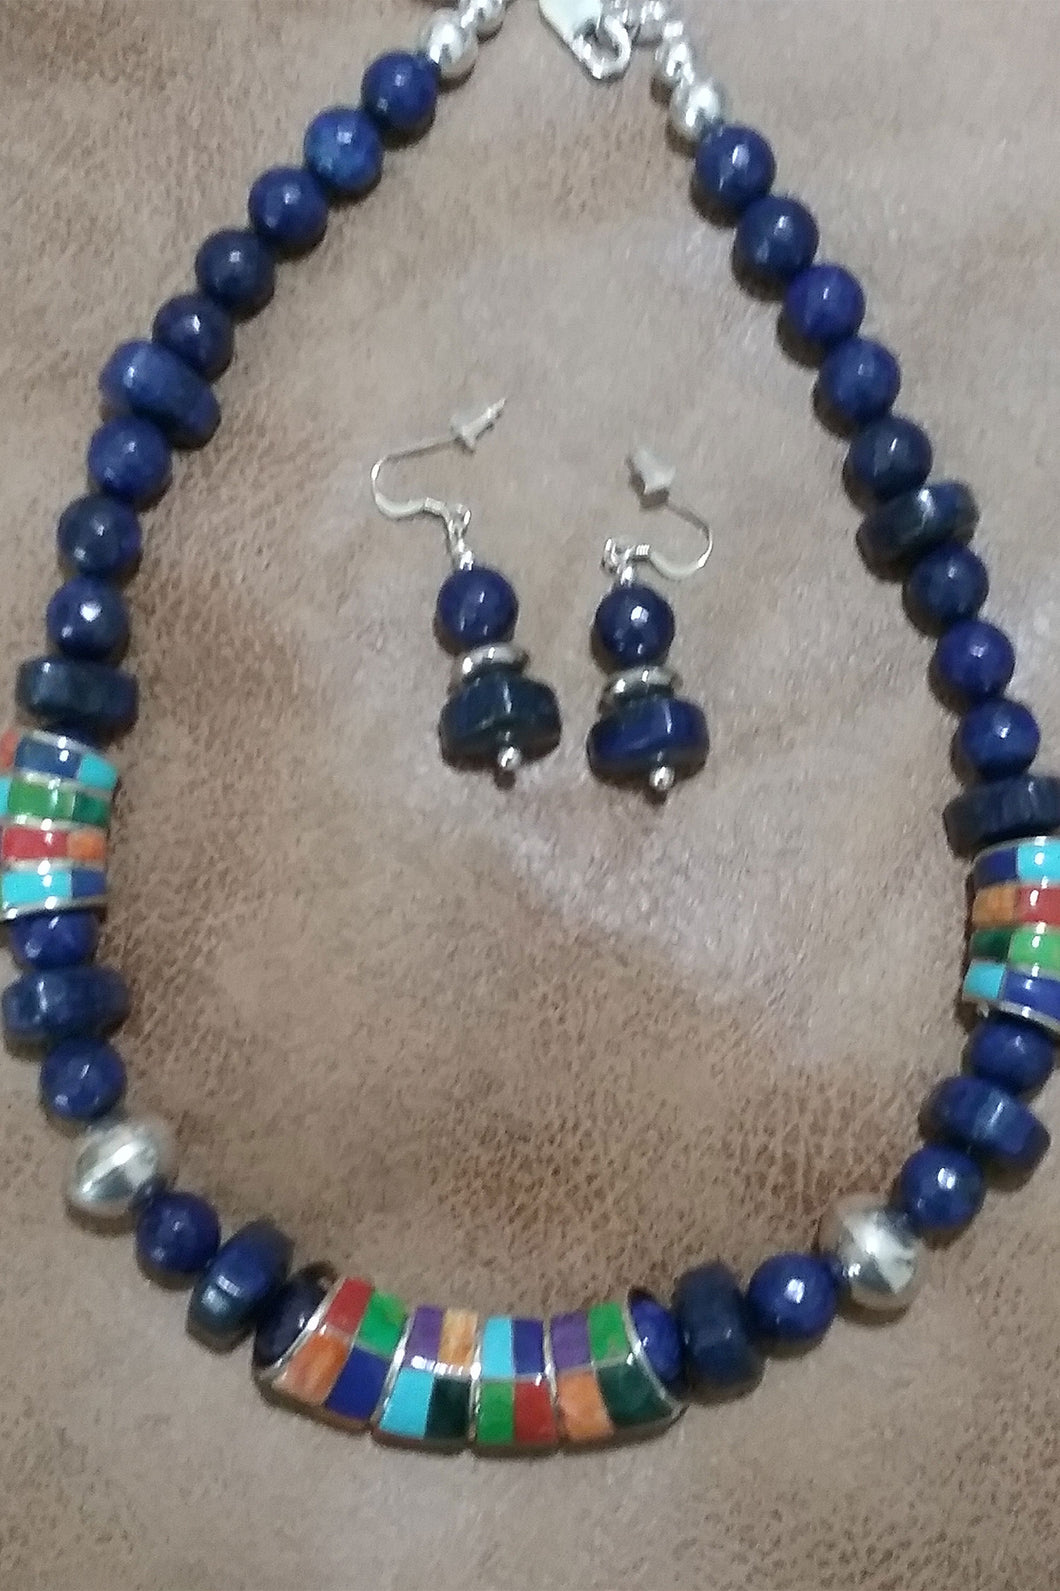 Single Strand Lapis Necklace with 3 Sterling Silver Slides and Earrings